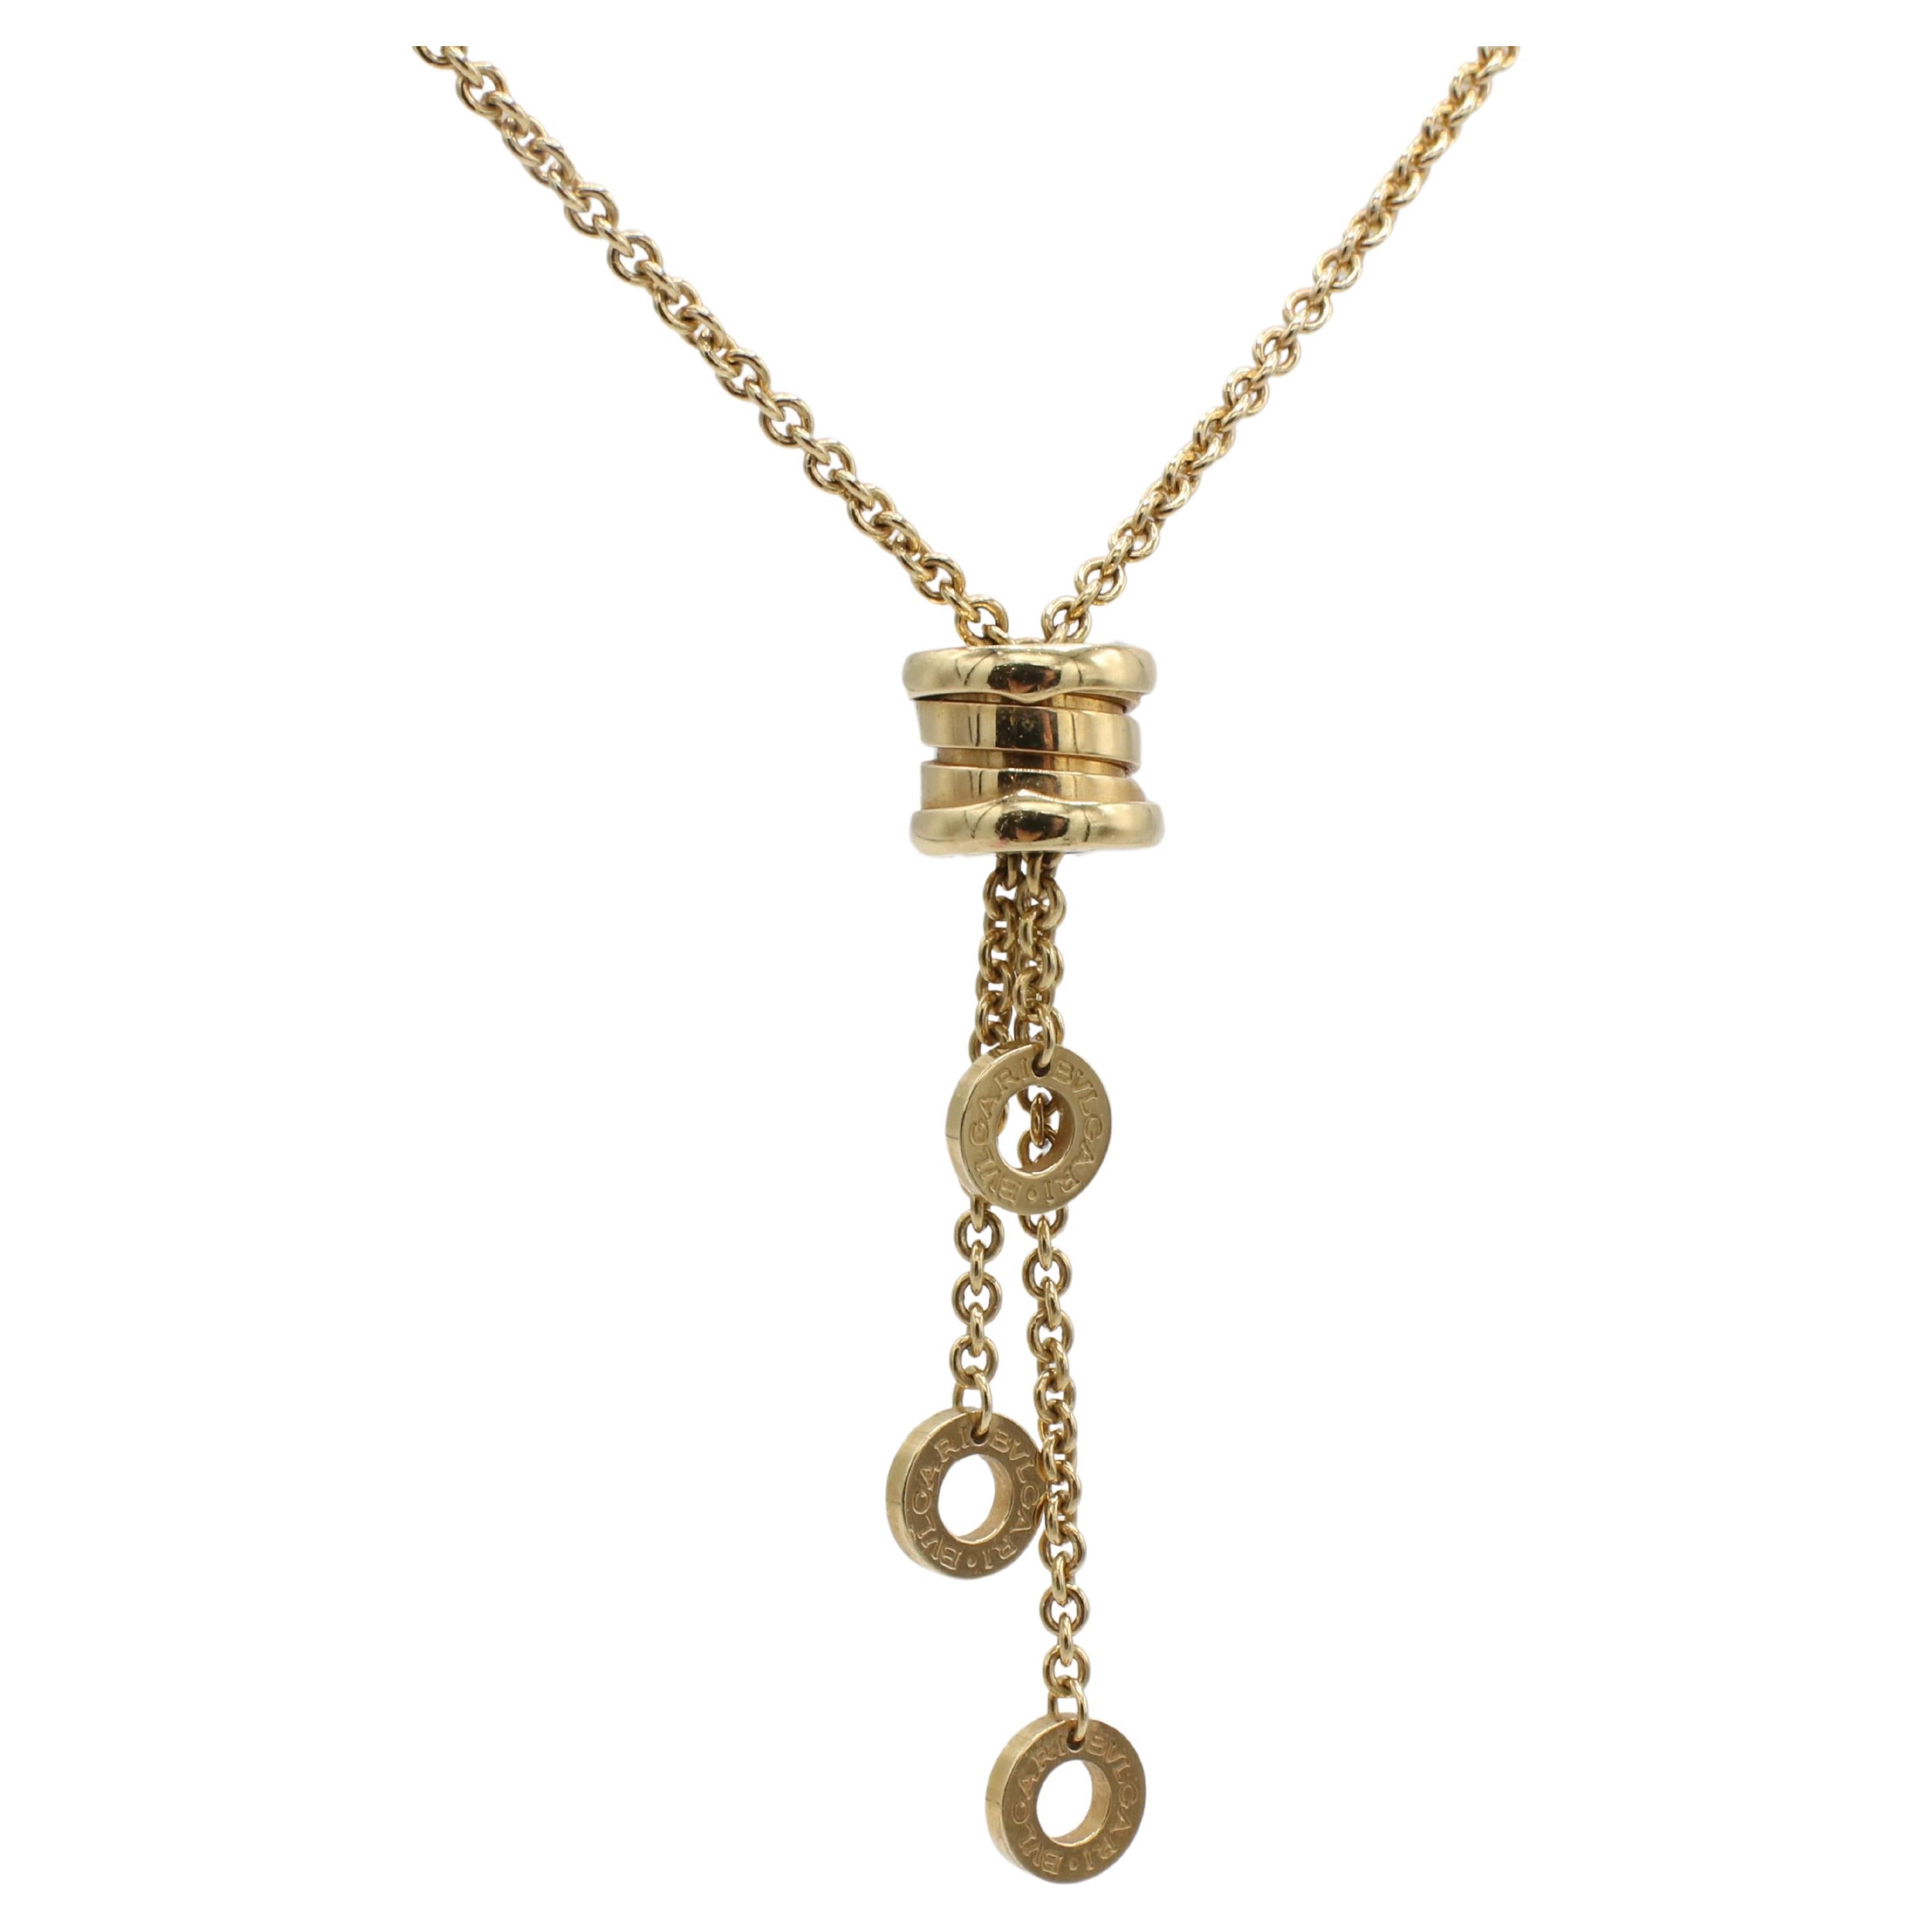 Bulgari Bvlgari B.Zero1 18 Karat Yellow Gold Drop Necklace 
Metal: 18k yellow gold
Weight:  15.39 grams
Length: 17.5 inches
Drop 50mm
Note: Box included (slight blue pen stain in inside top)
